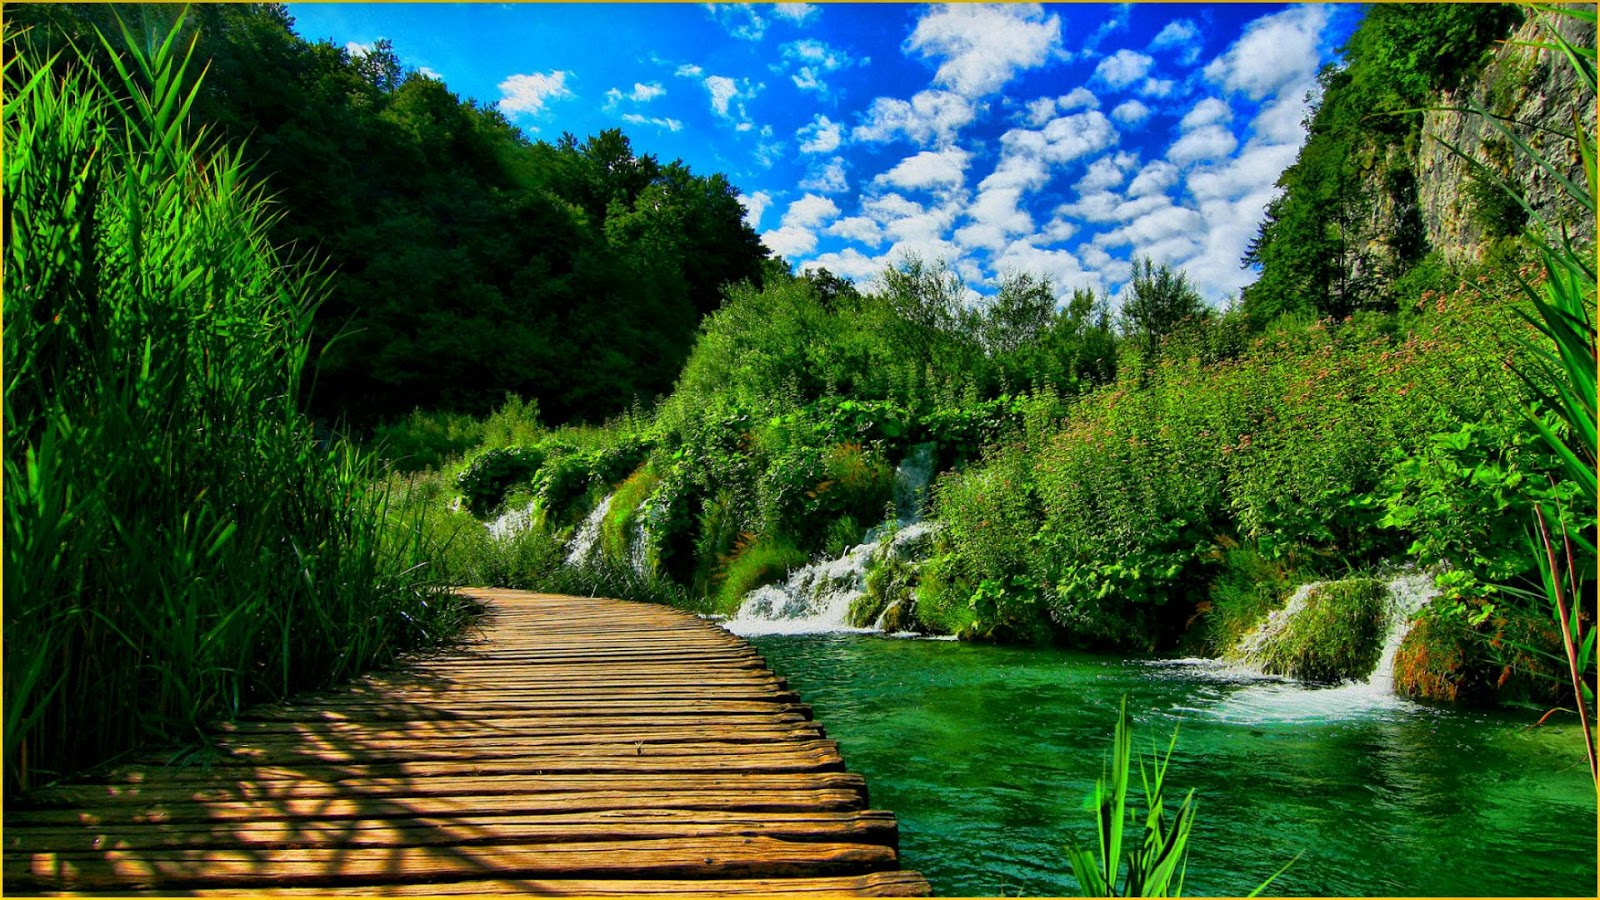 Nature-3d Hd Nature Wallpapers For Mobile - Nature Background Images  Downloads - 1600x900 Wallpaper 